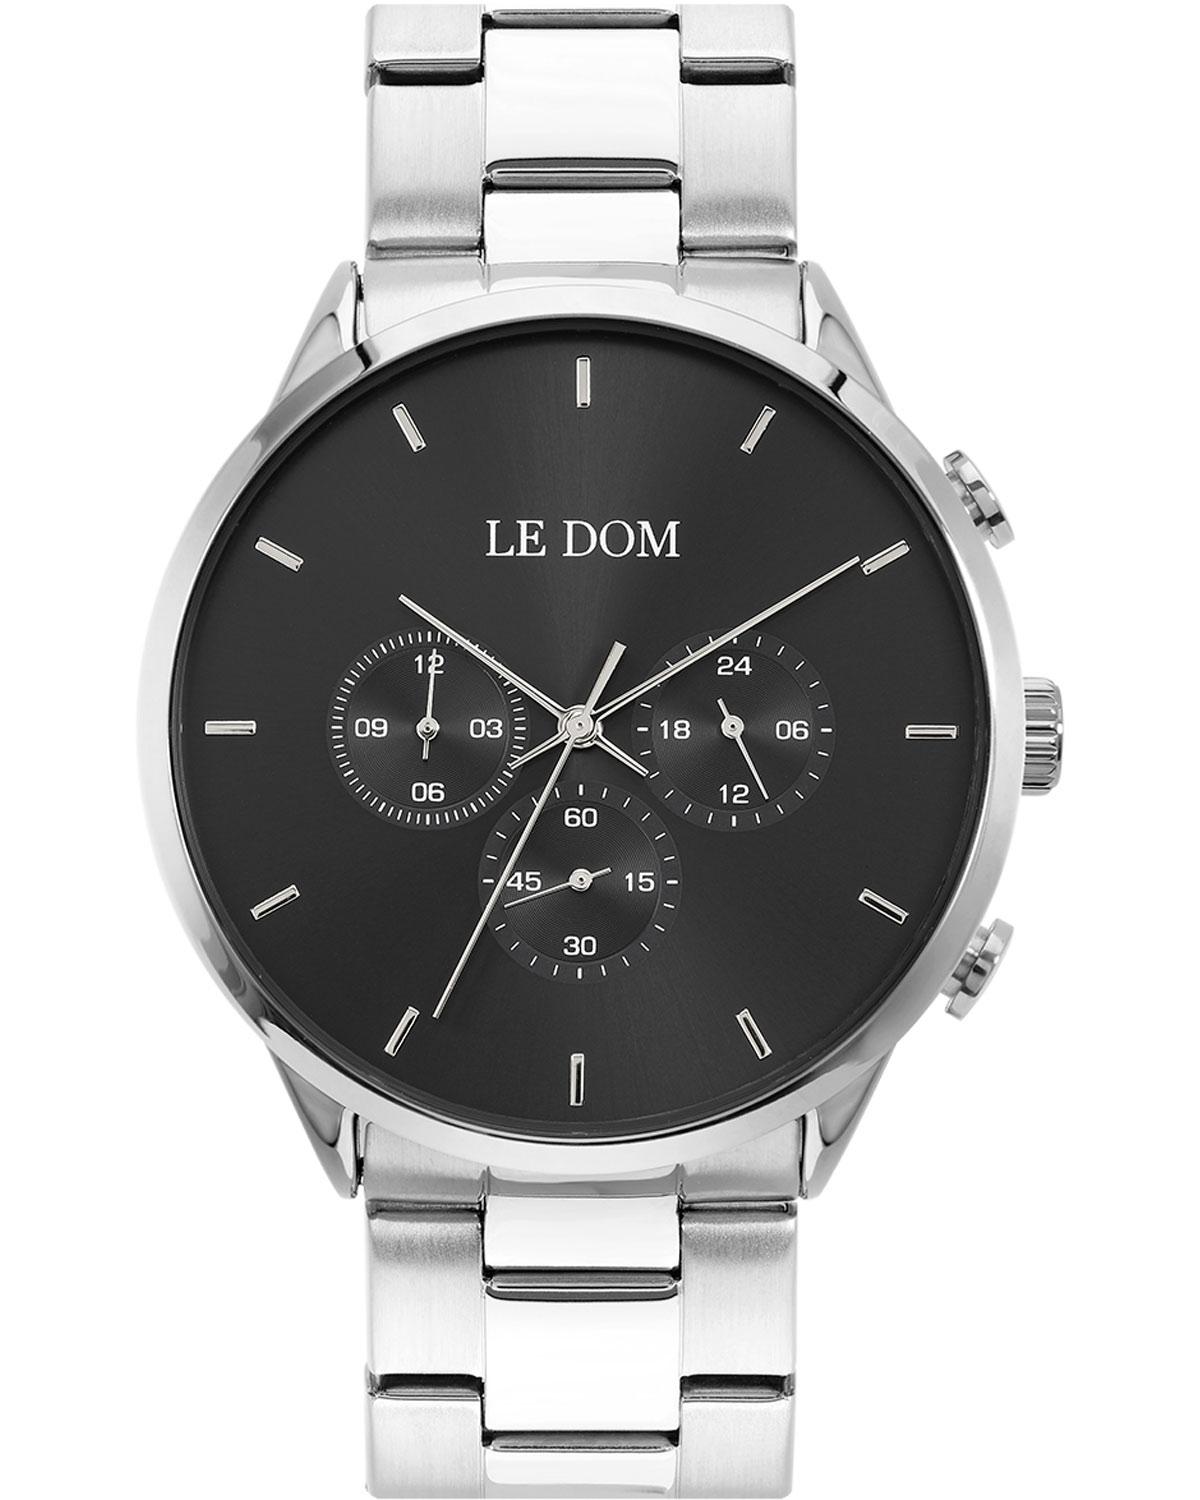 le dom principal chronograph ld 1436 1 silver case with stainless steel bracelet image1